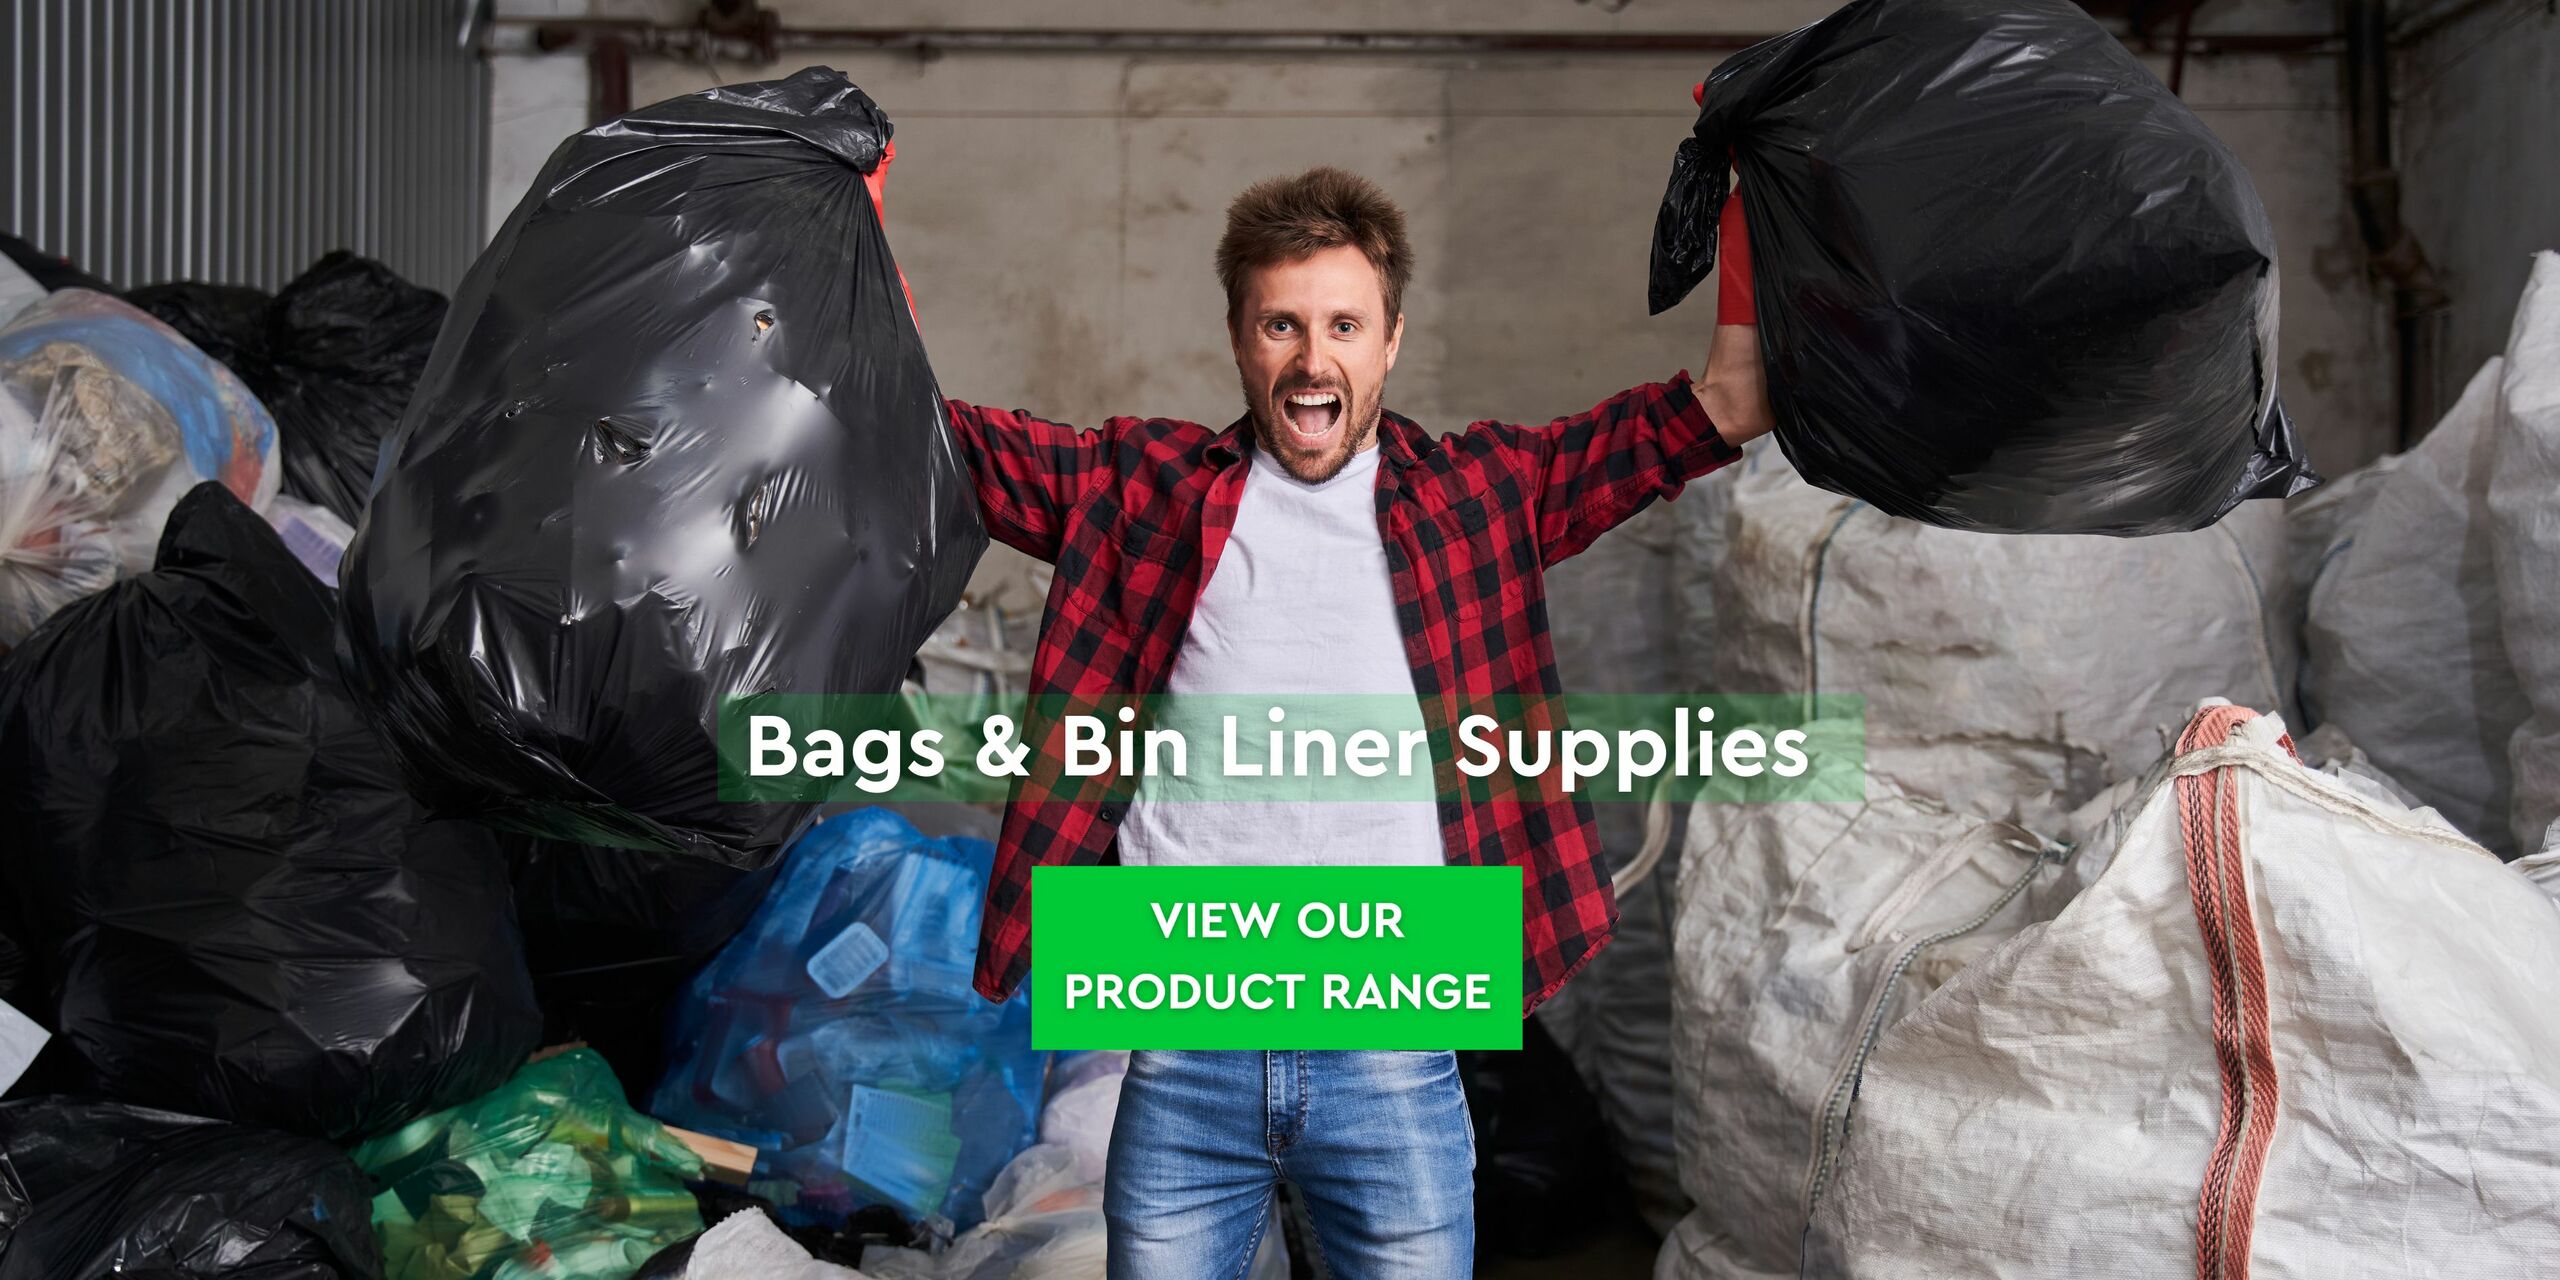 https://www.rubbishbags.co.nz/images/Bags_Bin_Liners_banner_picture_3_1_.jpg